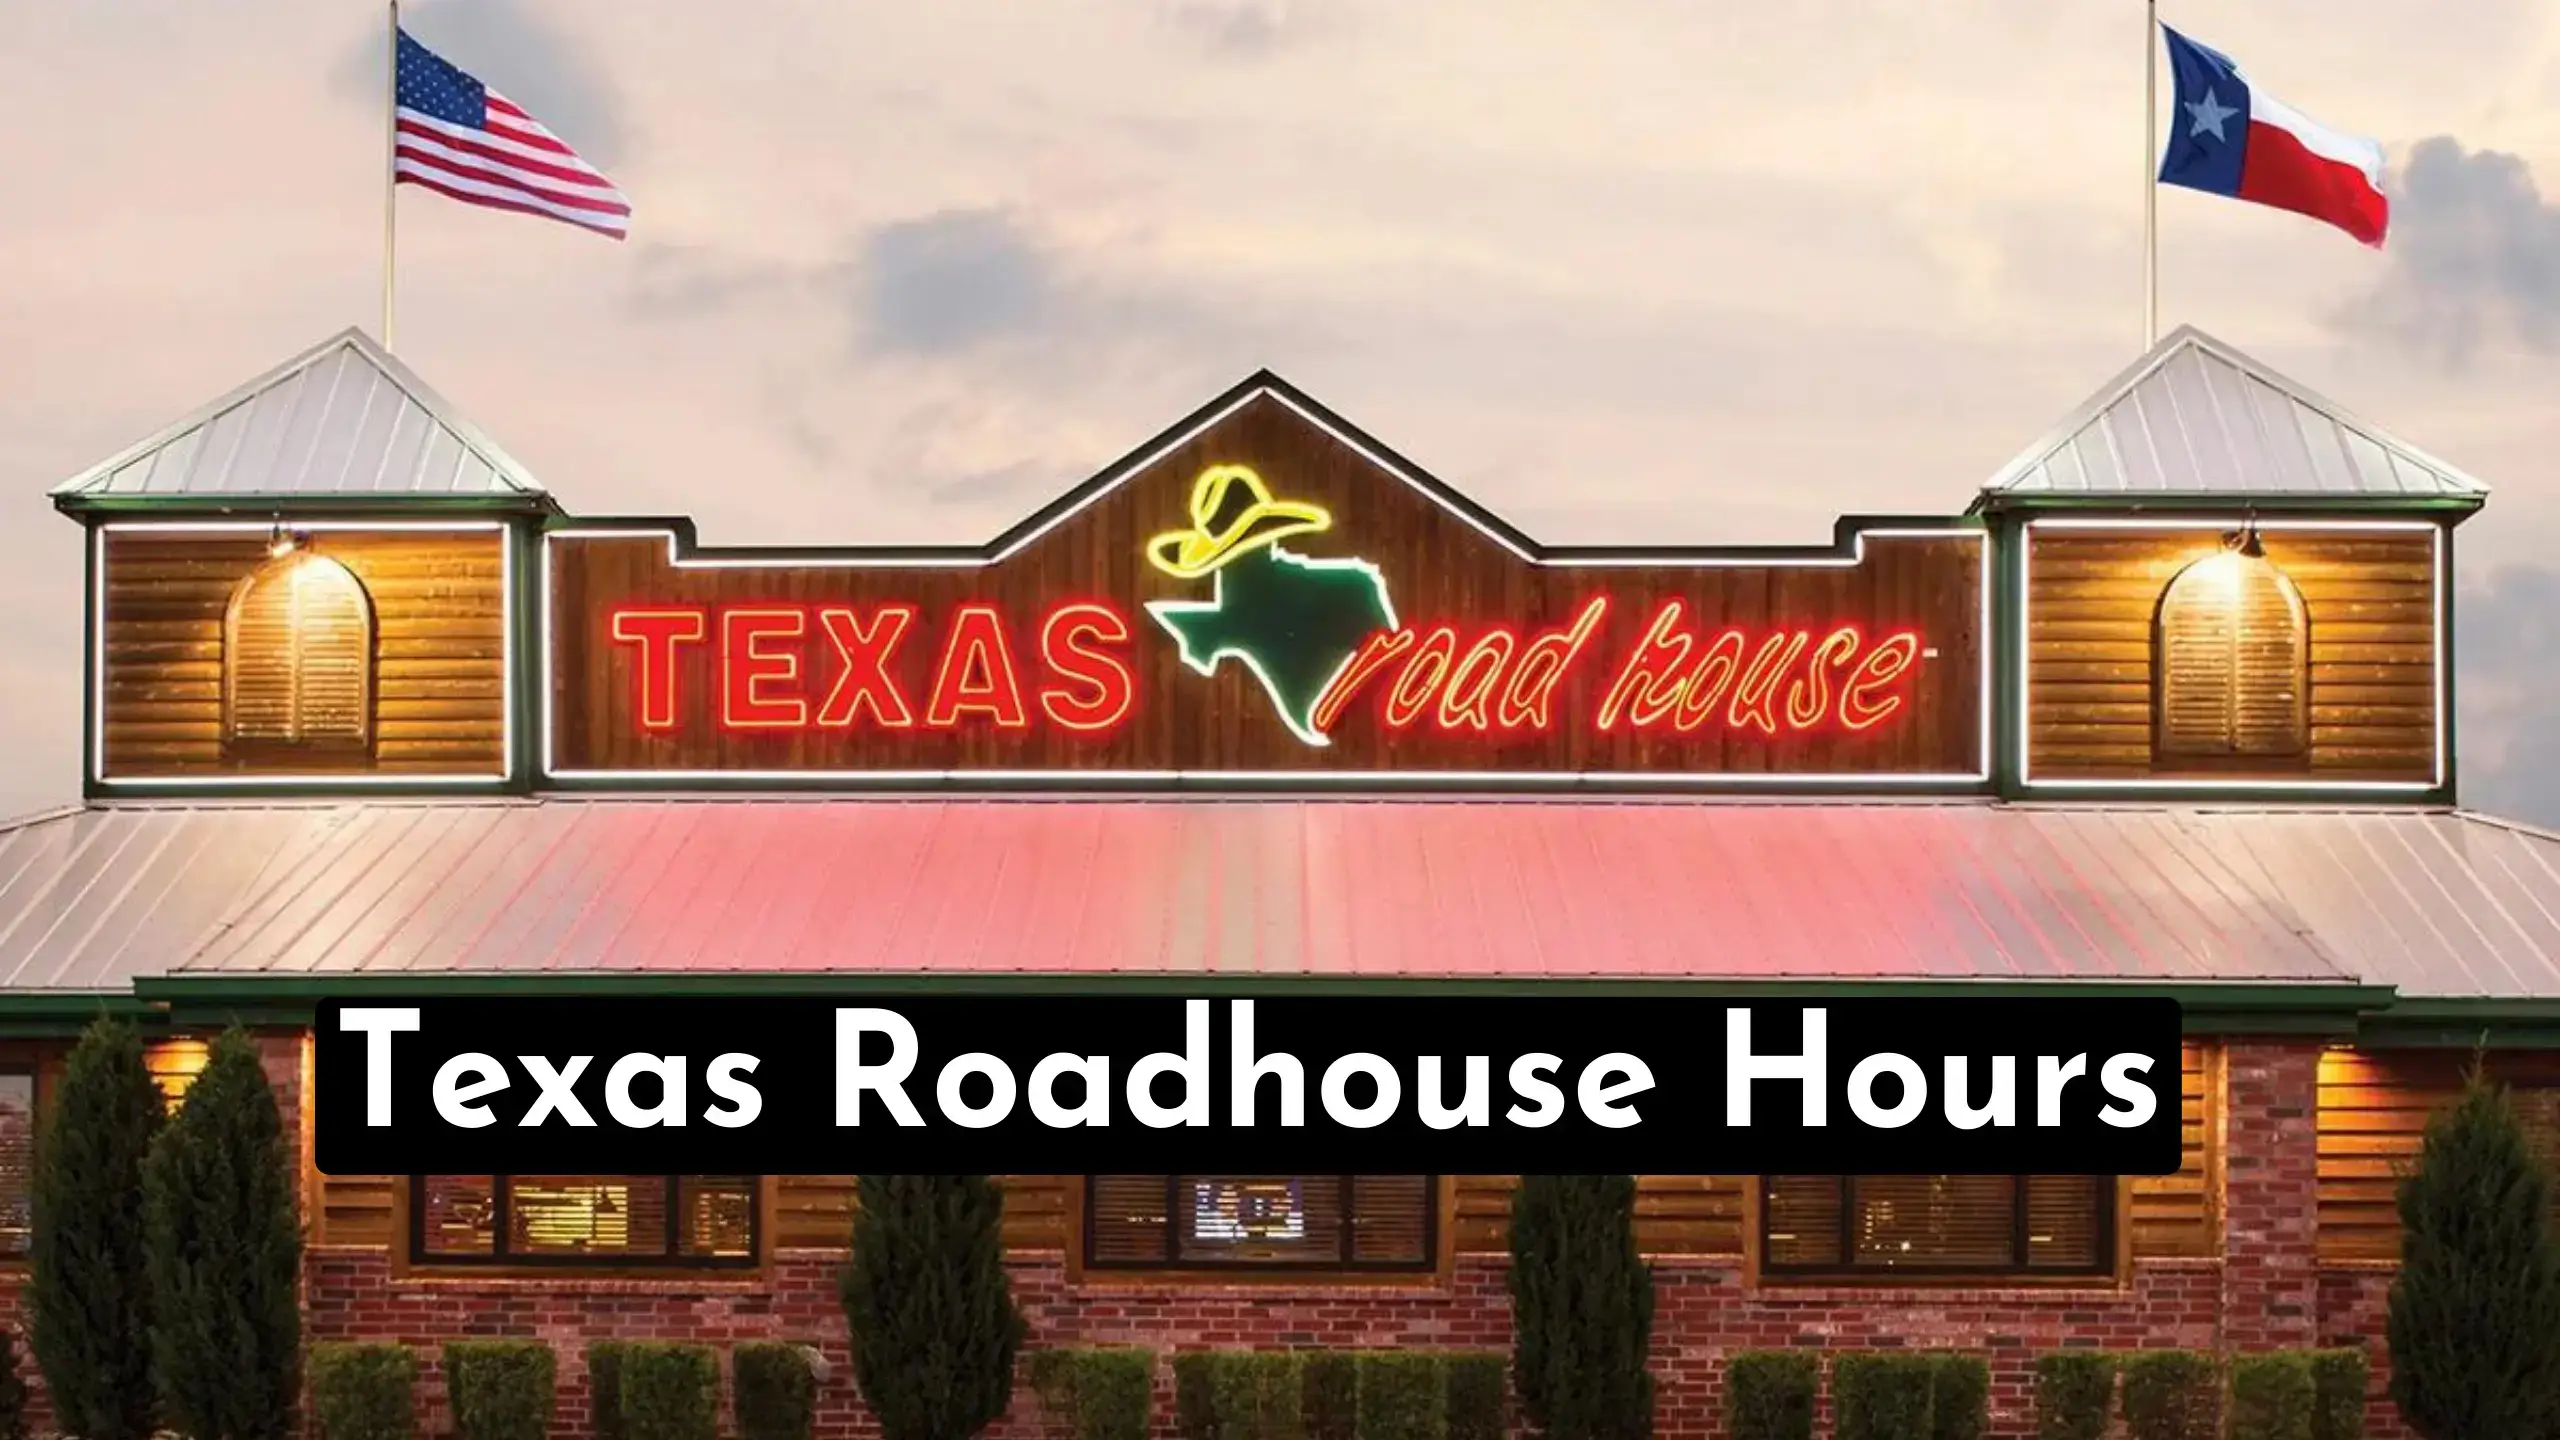 A Quick Guide To Discover Texas Roadhouse Hours & Near Me Locations | Also Quickly Find At What Time Does Texas Roadhouse Close & Open Today?